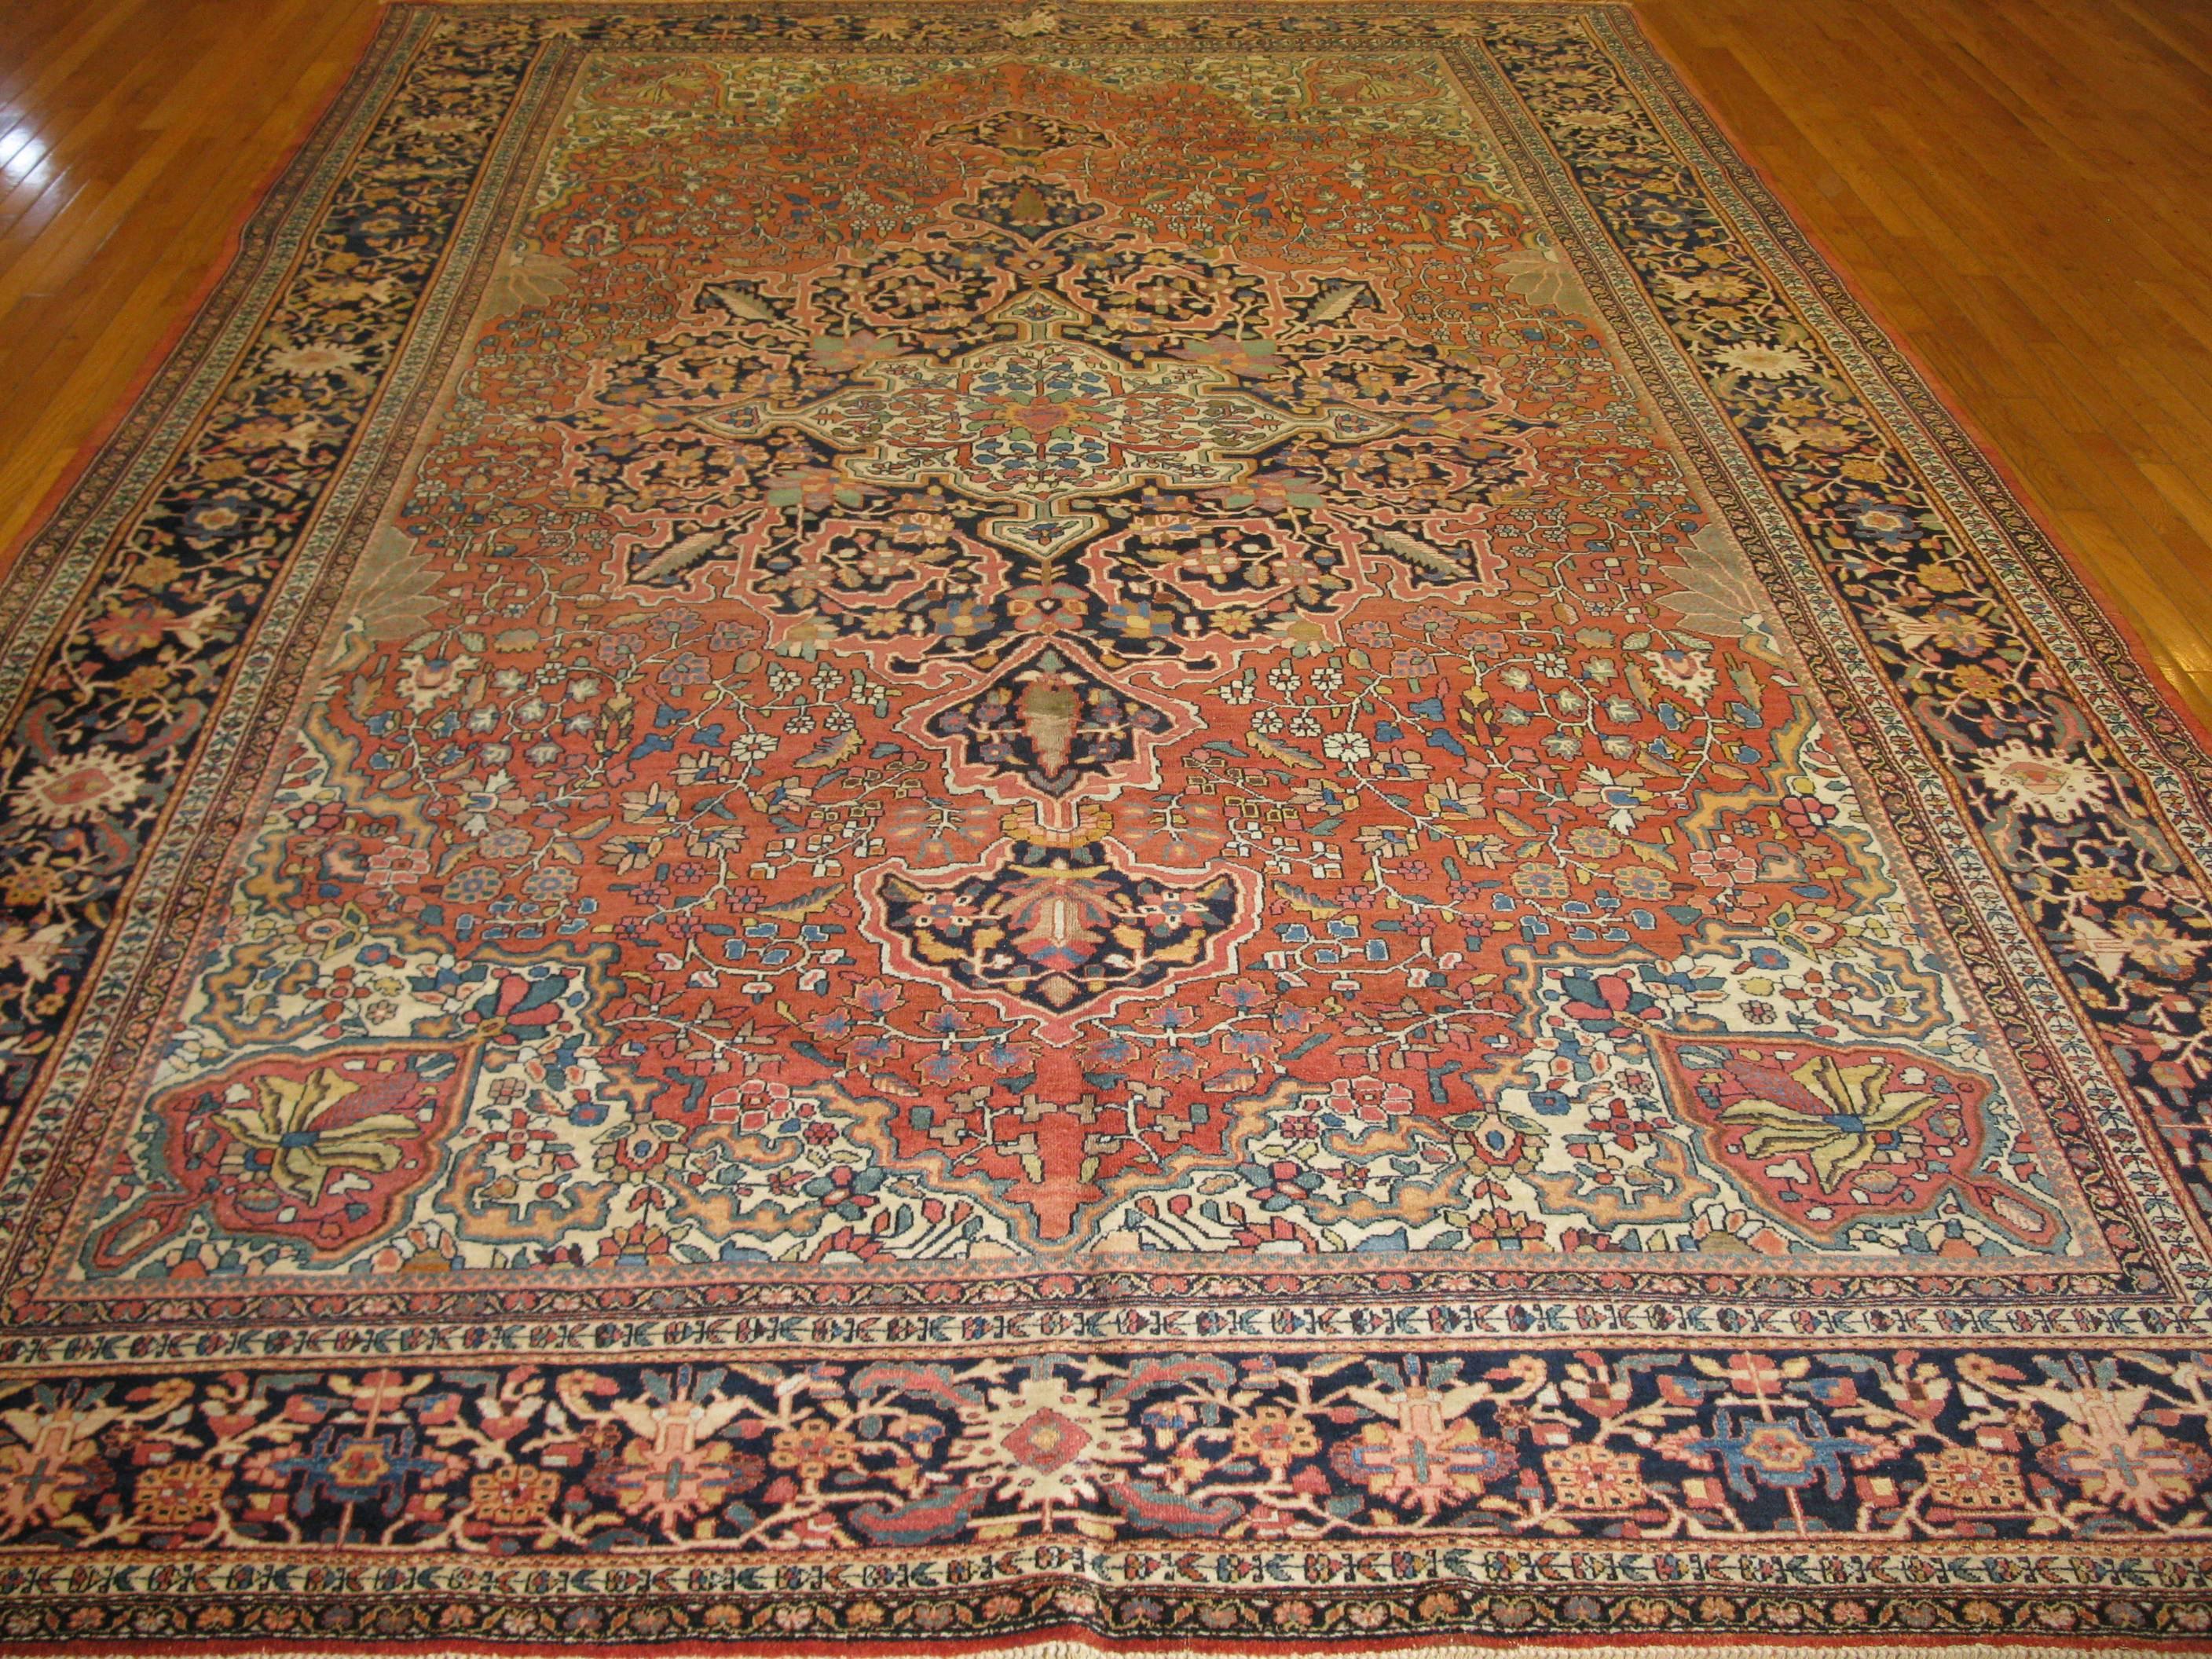 A fantastic hand-knotted rug in great condition. This is a room size antique Persian Sarouk Farahan rug with a Traditional Design, vegetable dyes and all wool and cotton. It measures 8' 6'' x 12' 6''.